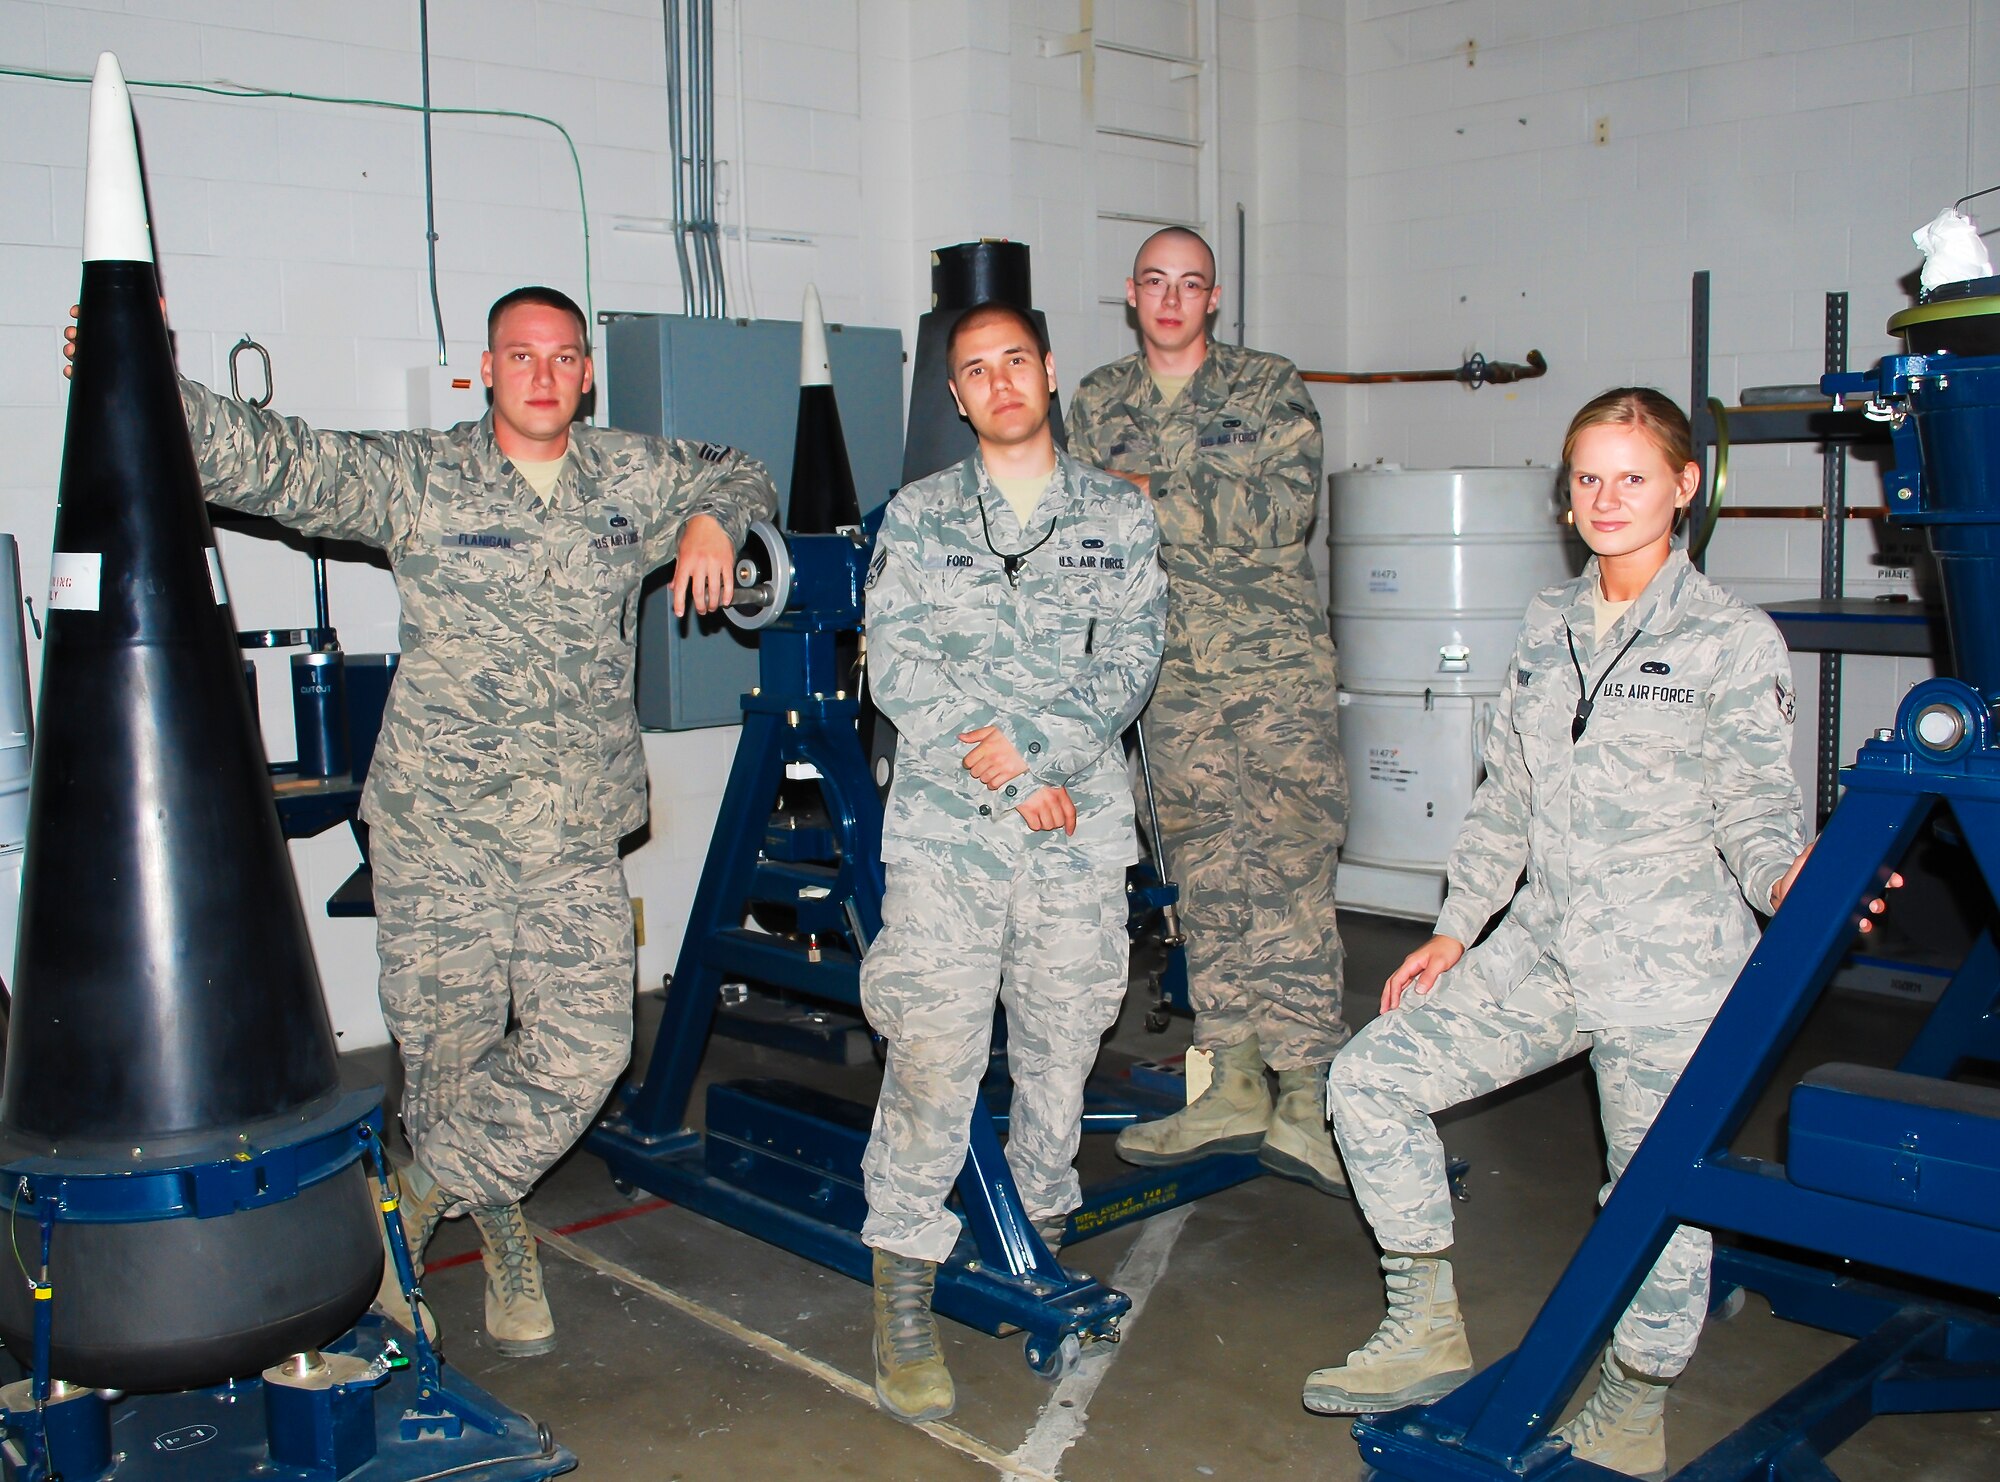 (From left to right) Staff Sgt. James Flanigan, Senior Airman Andrew Ford, and Airmen 1st Class Matthew Gish and Jennifer Cook, 341st Munitions Squadron team, pose for a photograph after a training session at Malmstrom Air force Base Aug. 21. The team is one of nine from the base that will be competing in the 2014 Global Strike Challenge. (U.S. Air Force photo/Airman 1st Class Collin Schmidt)